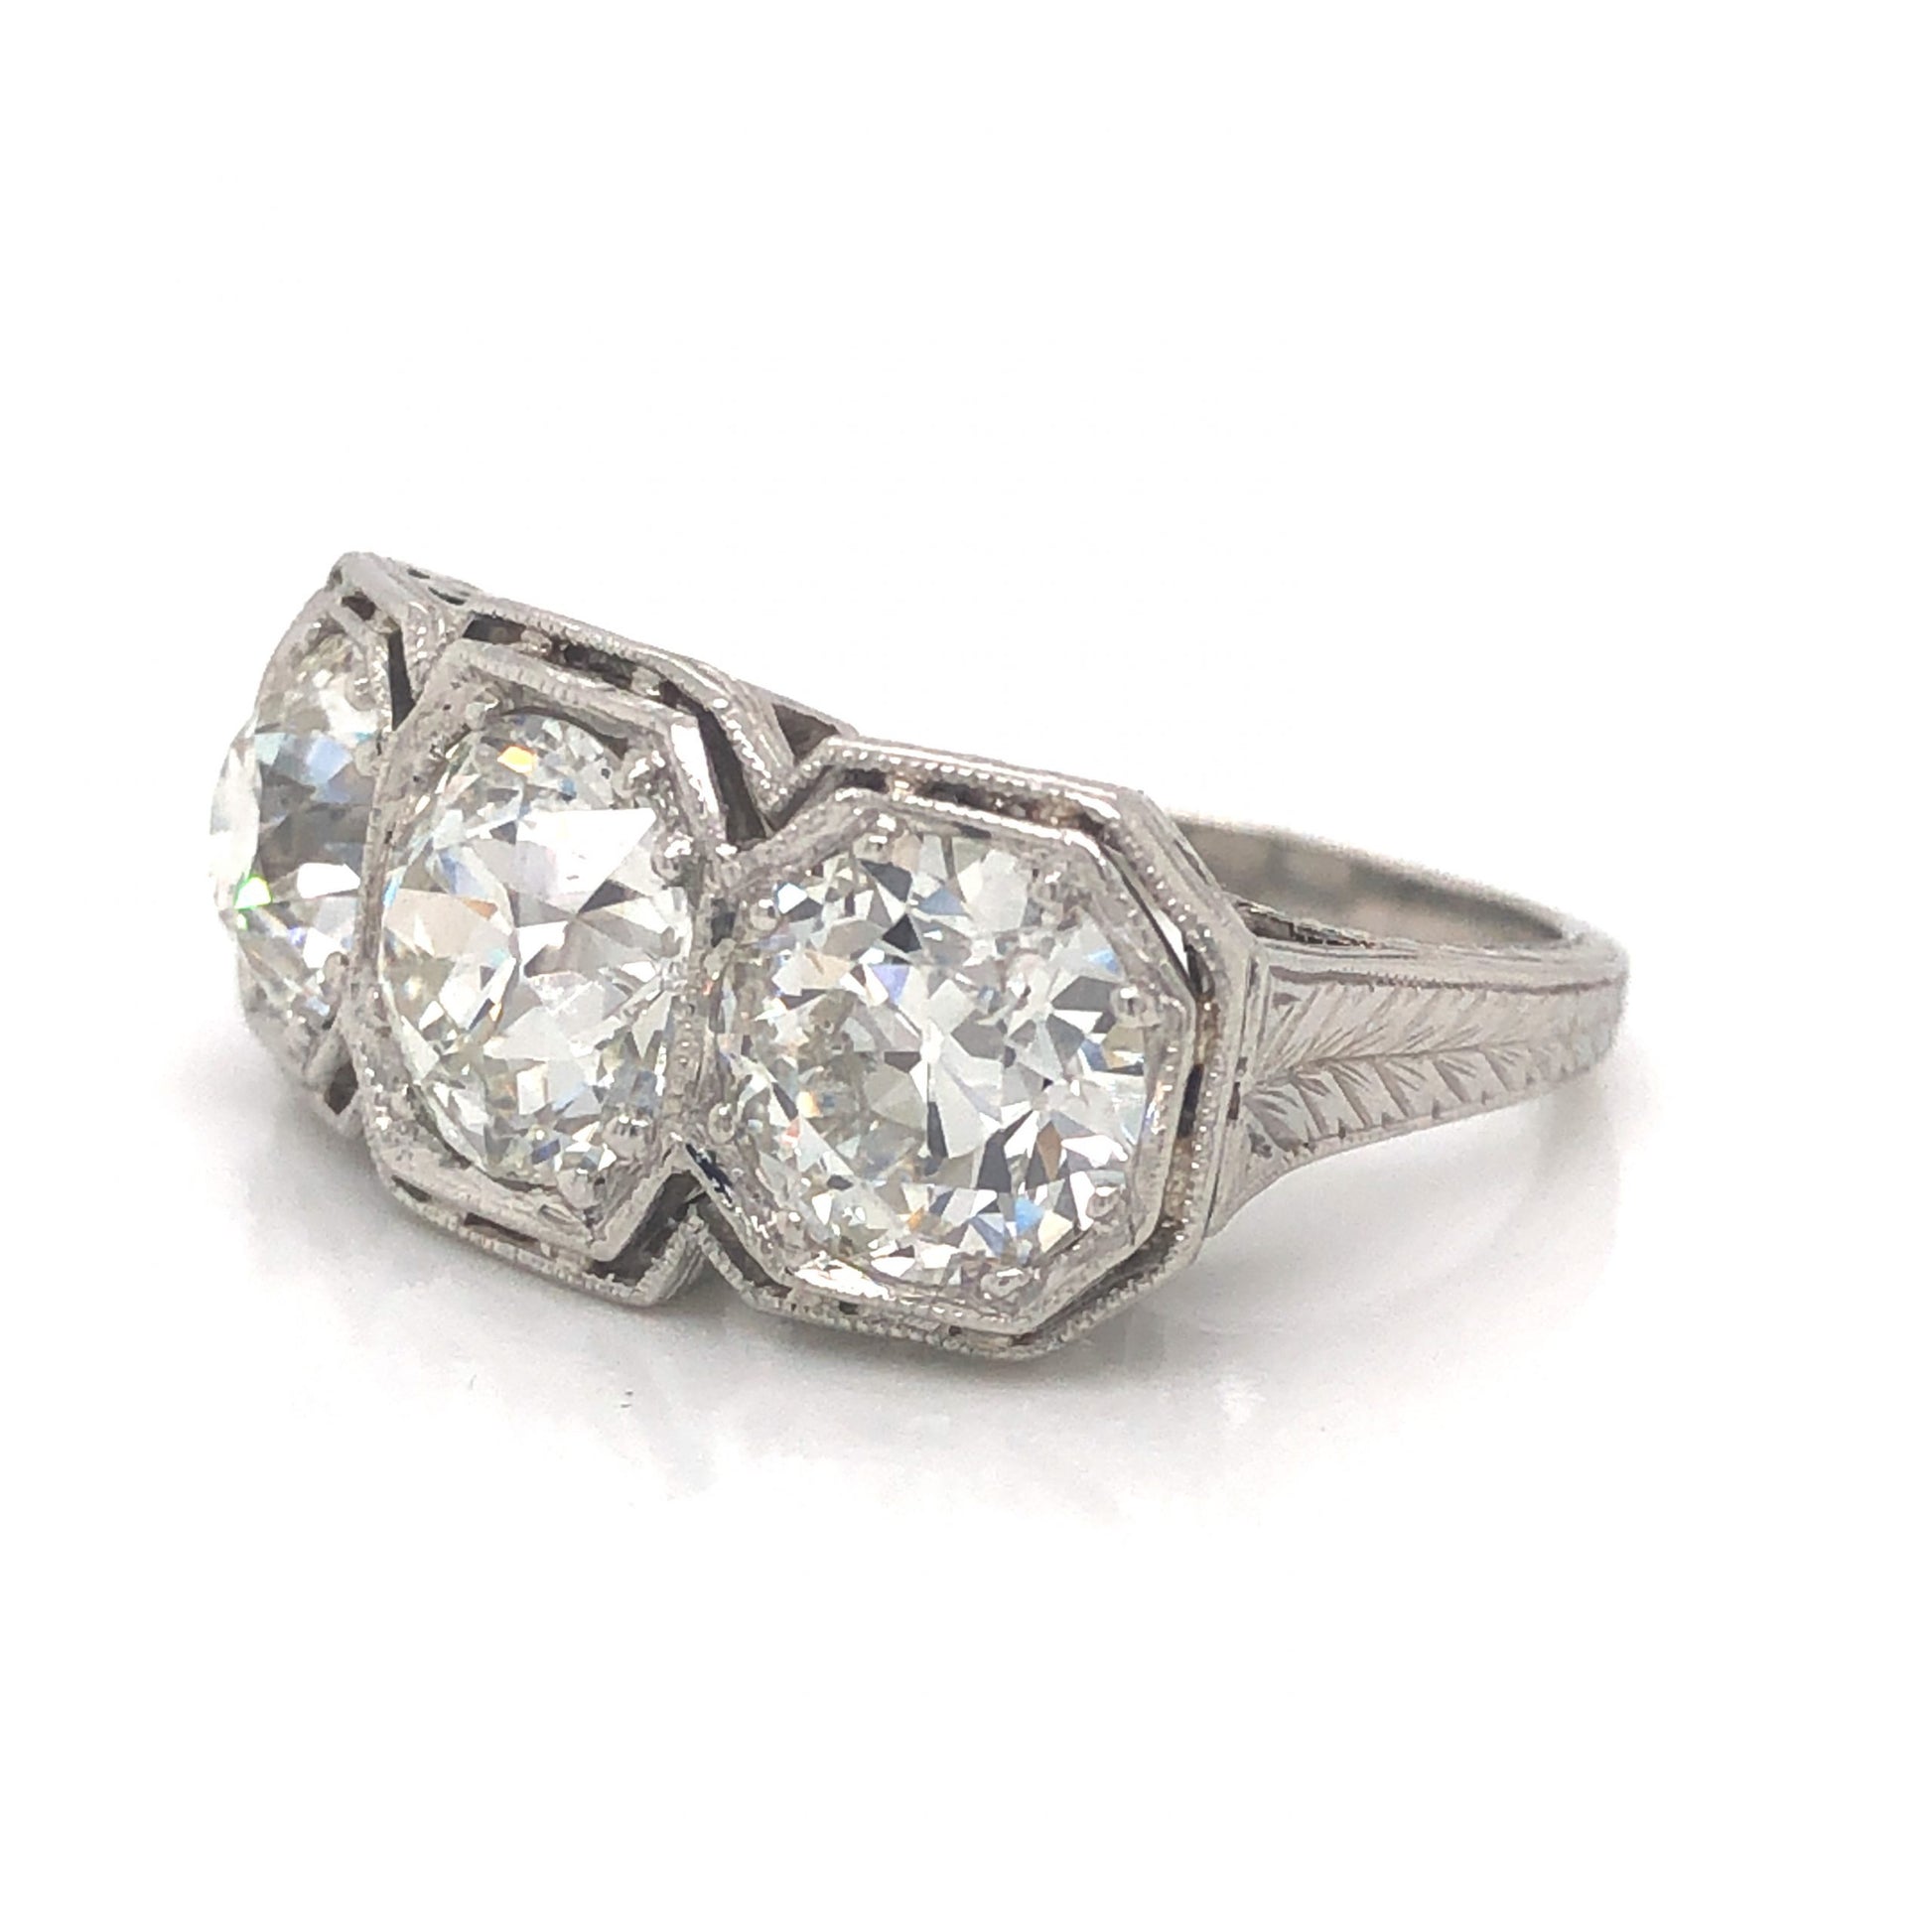 4.55 Old European Cut Diamond Cocktail Ring in PlatinumComposition: PlatinumRing Size: 6Total Diamond Weight: 4.55 ctTotal Gram Weight: 8.0 g